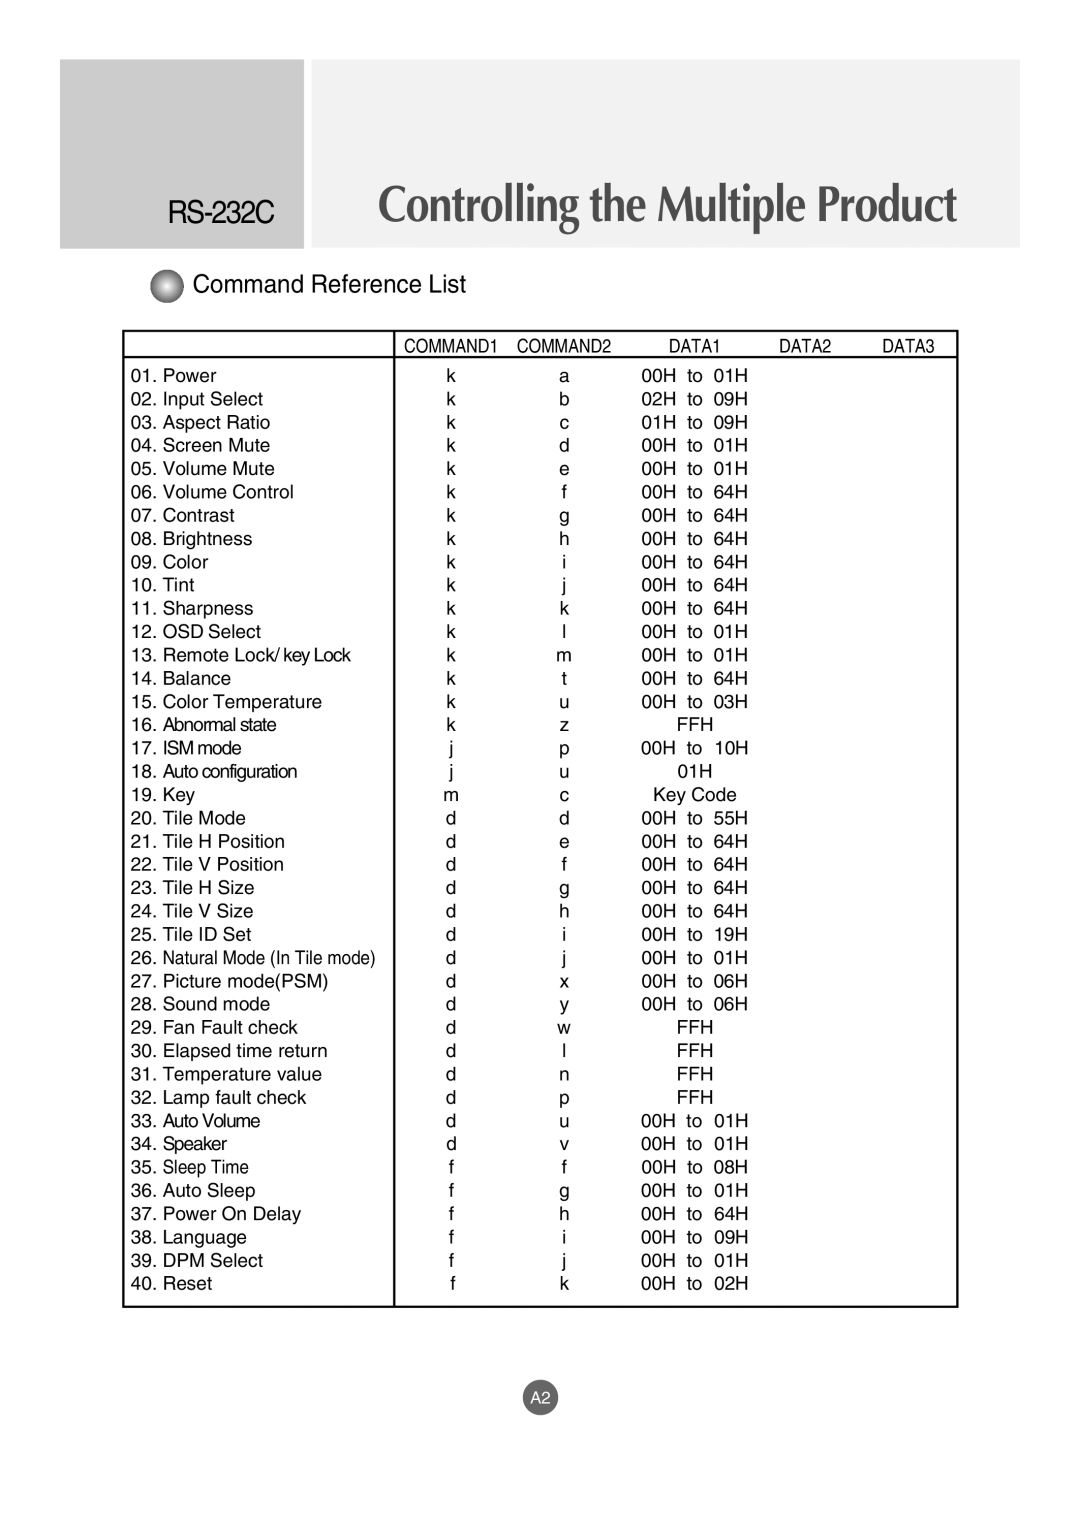 LG Electronics M4210LCBA owner manual Command Reference List, RS-232C Controlling the Multiple Product 